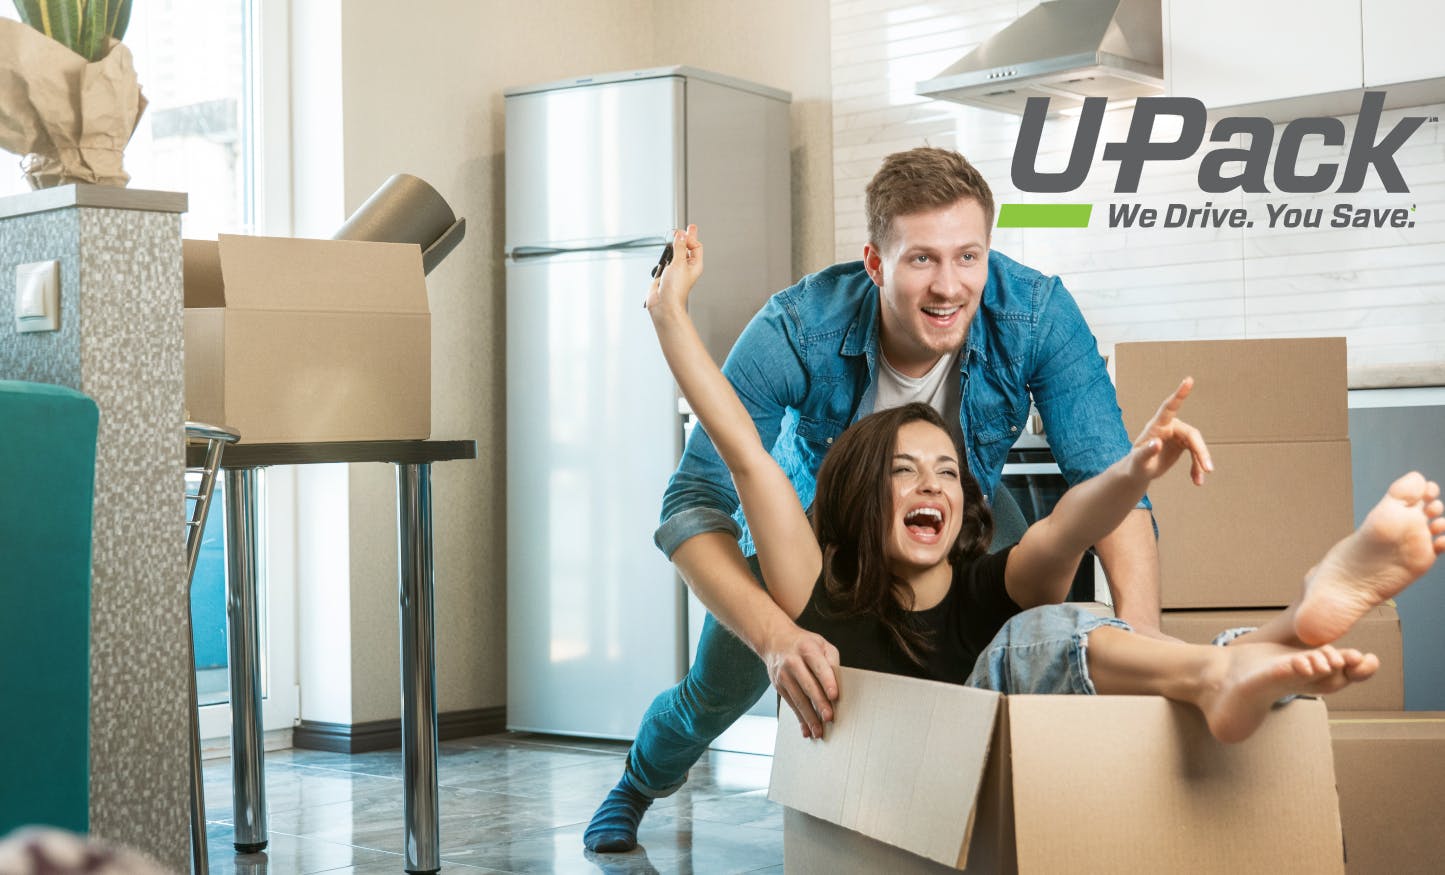 U-Pack Moving Company Review: You Pack, They Drive